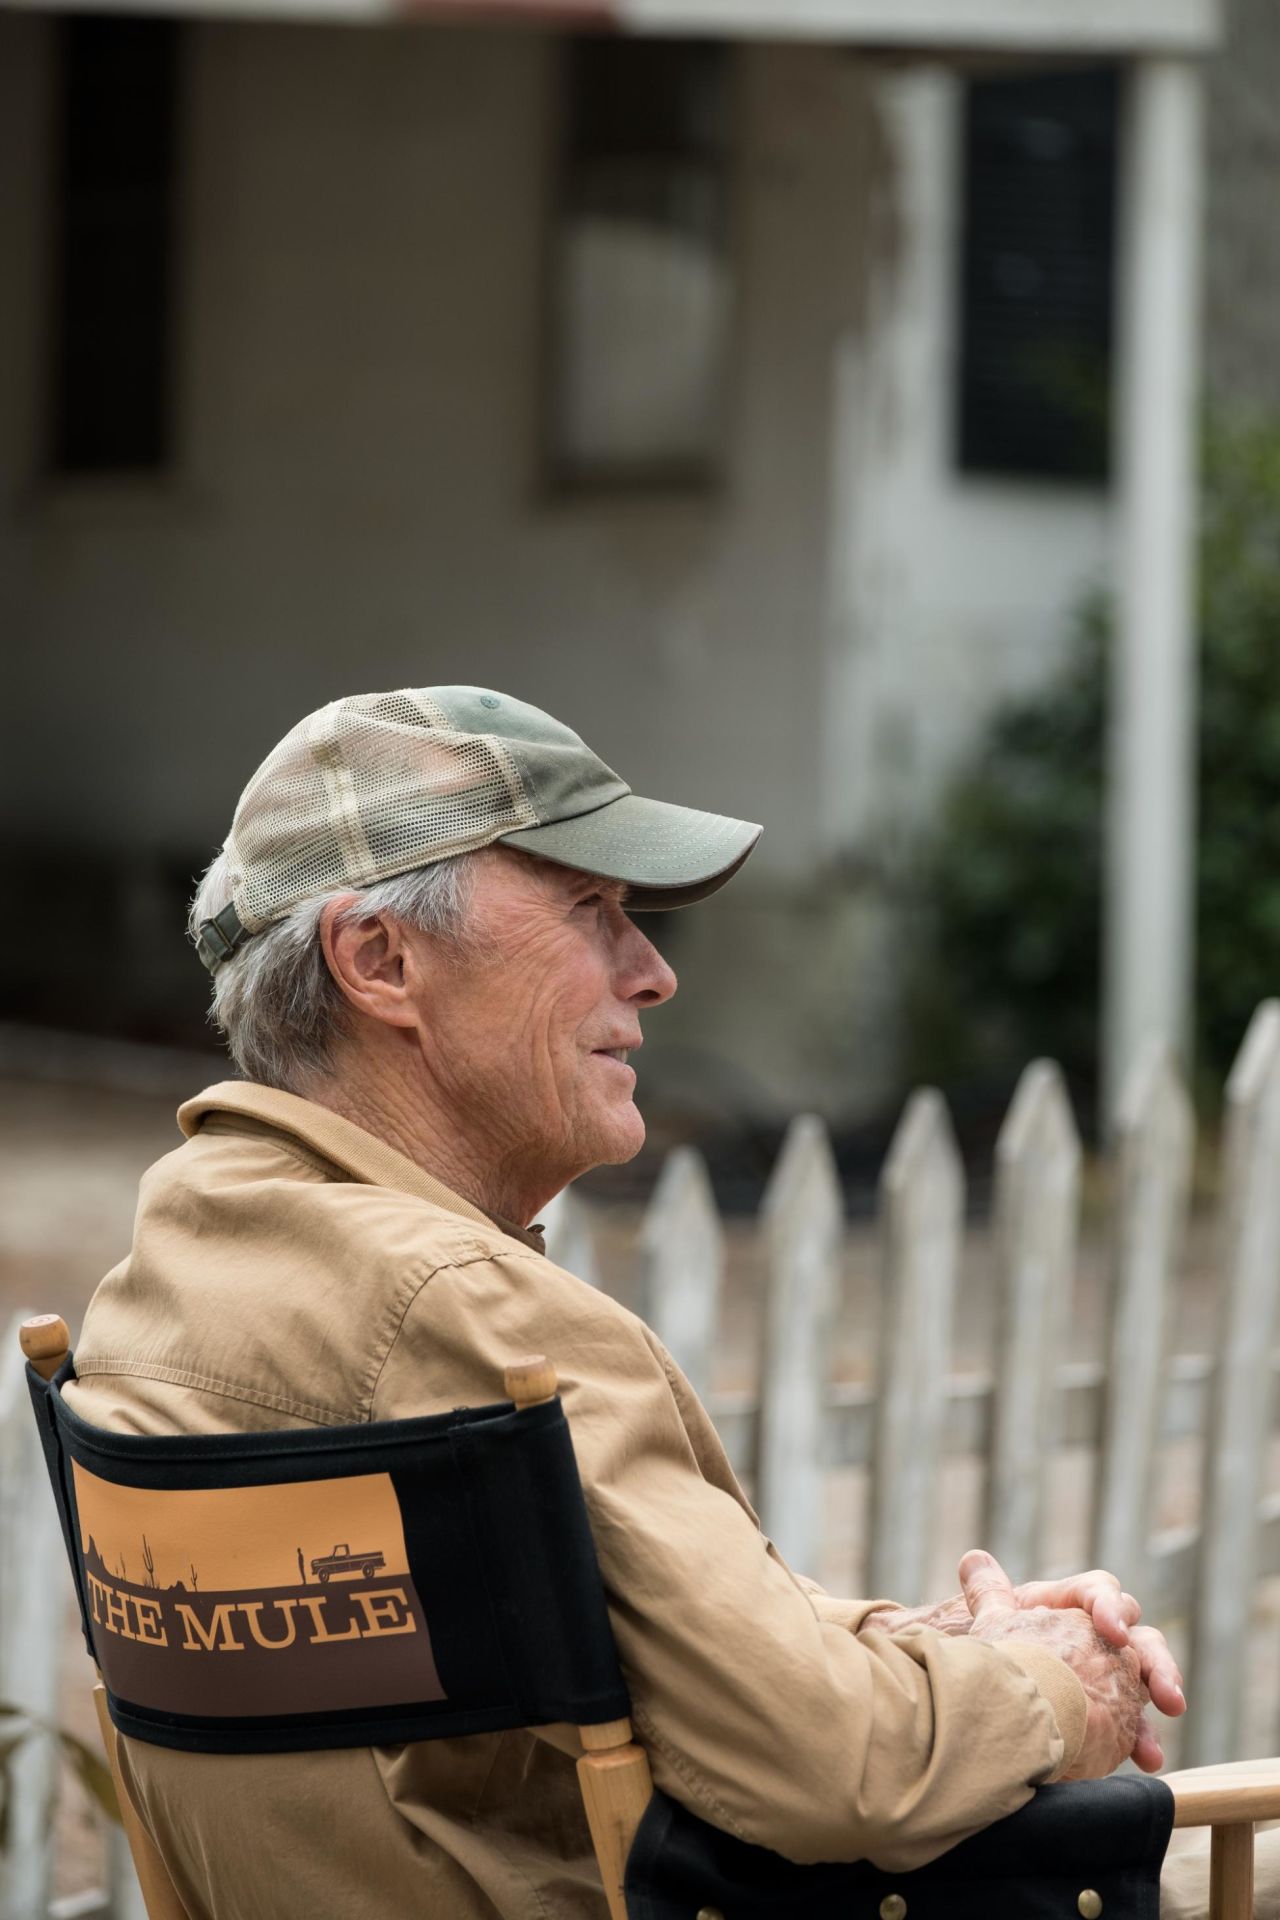 Eastwood on set of "The Mule" (2018).